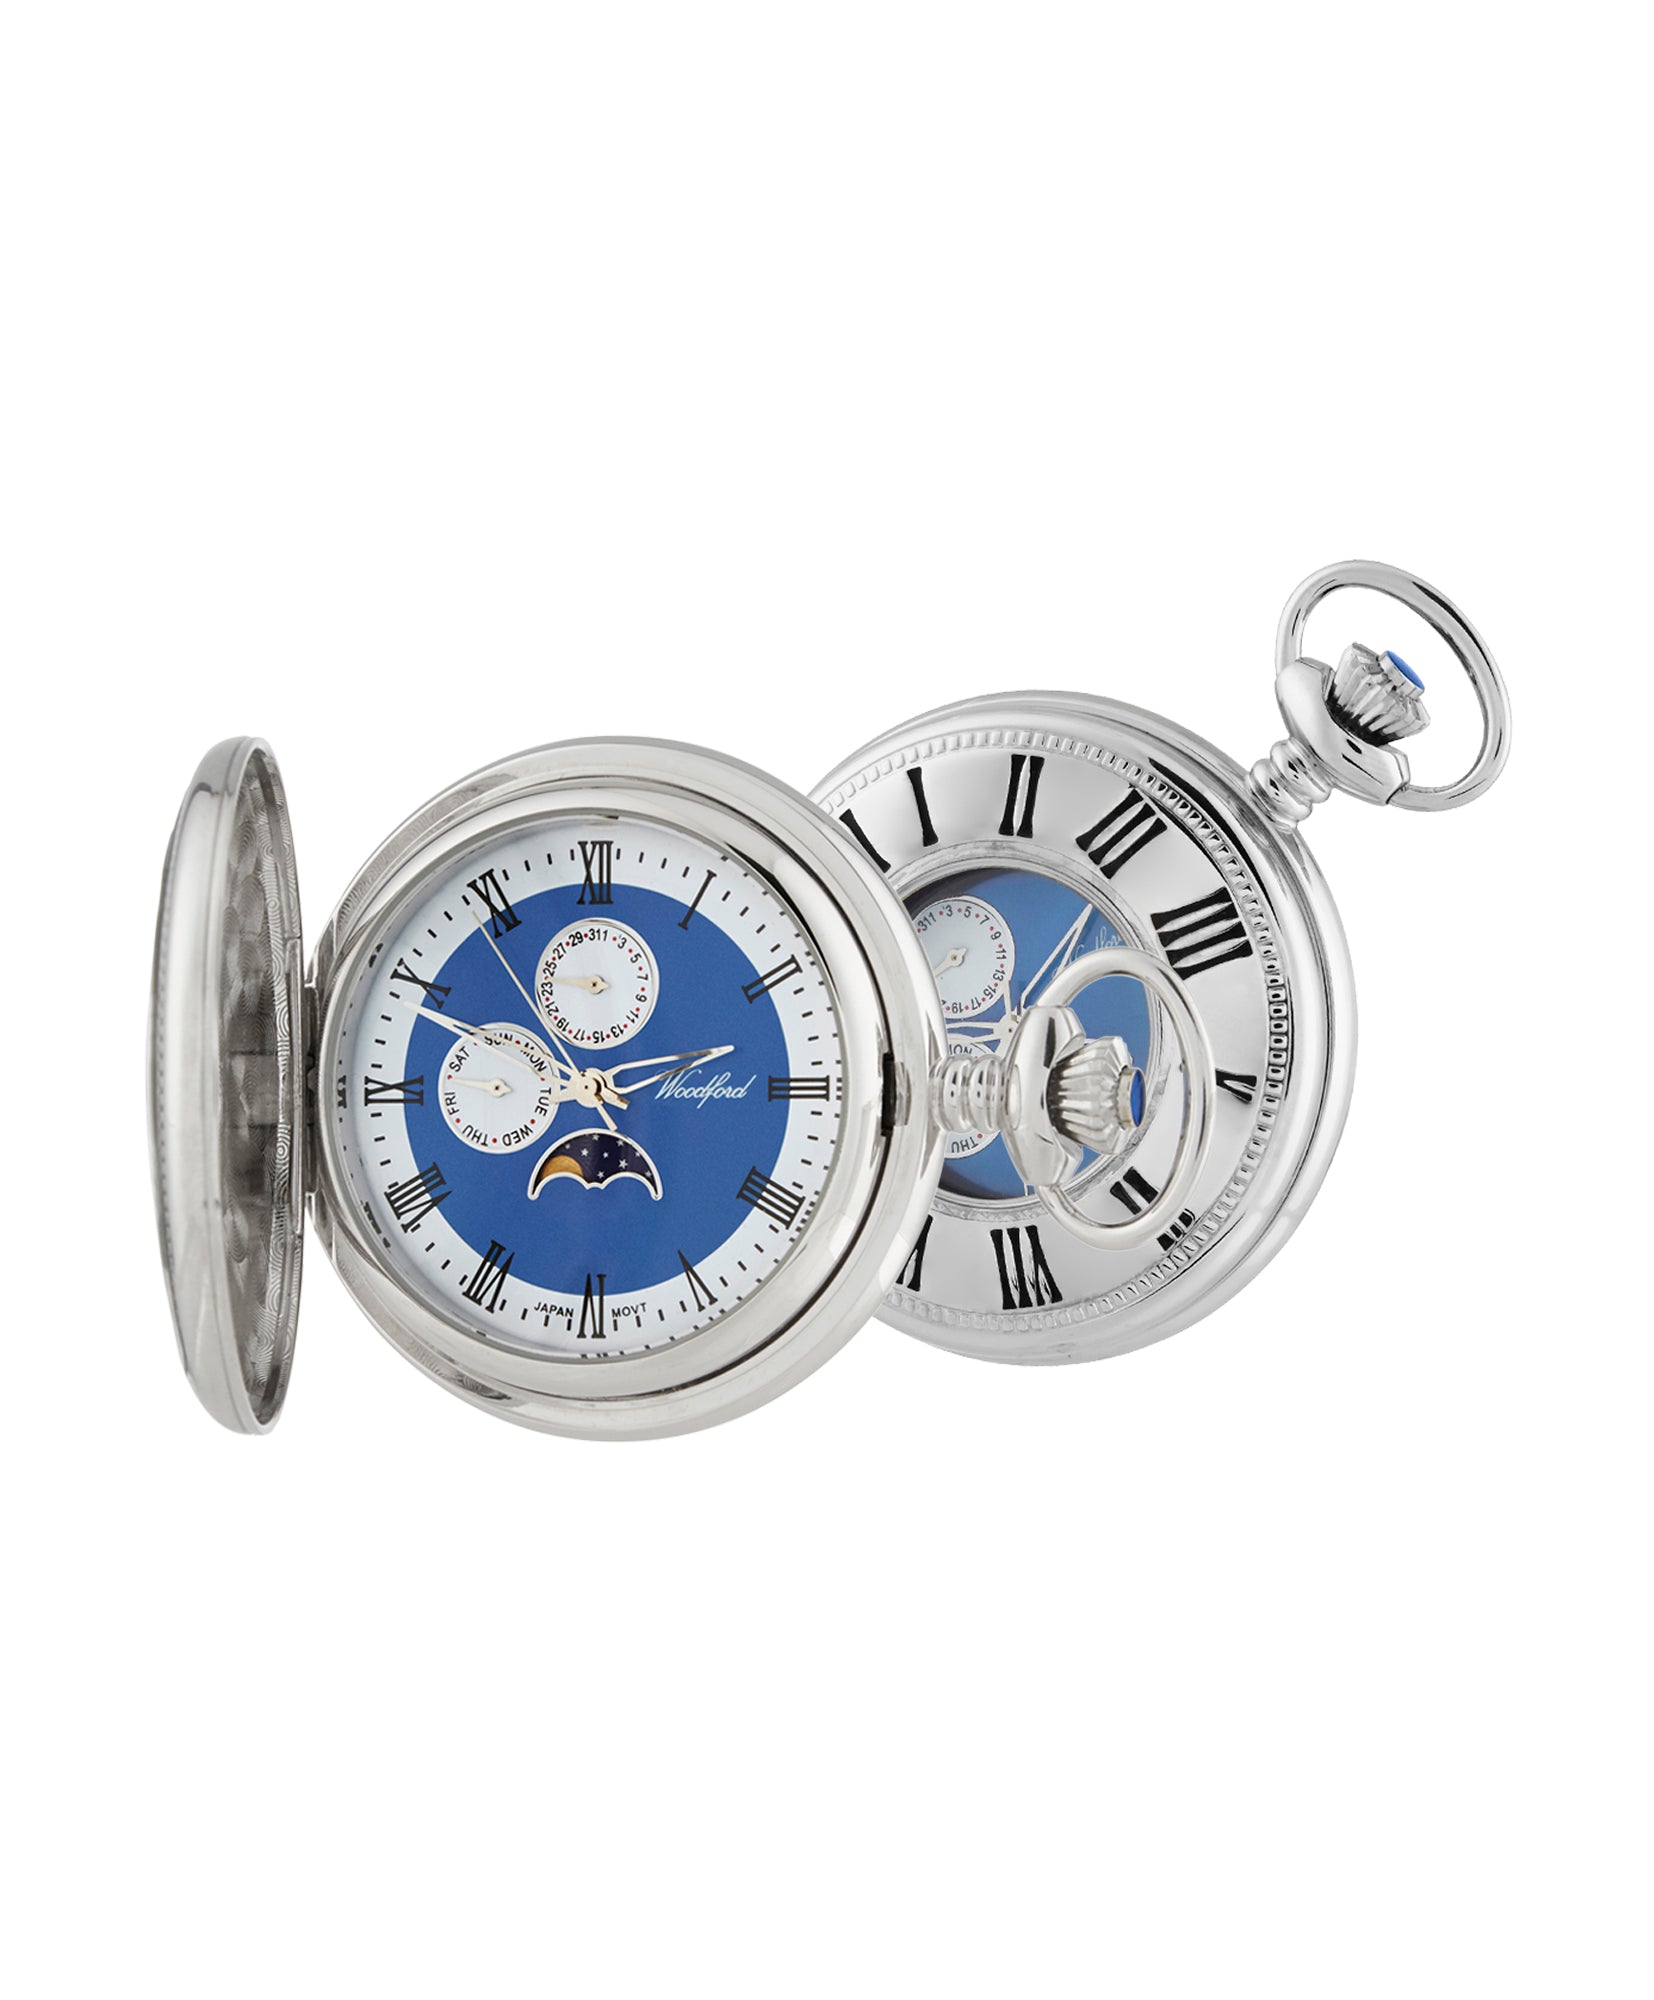 Chrome Quartz Pocket Watch With Chain  Blue Dial with Moon Phase Features. 